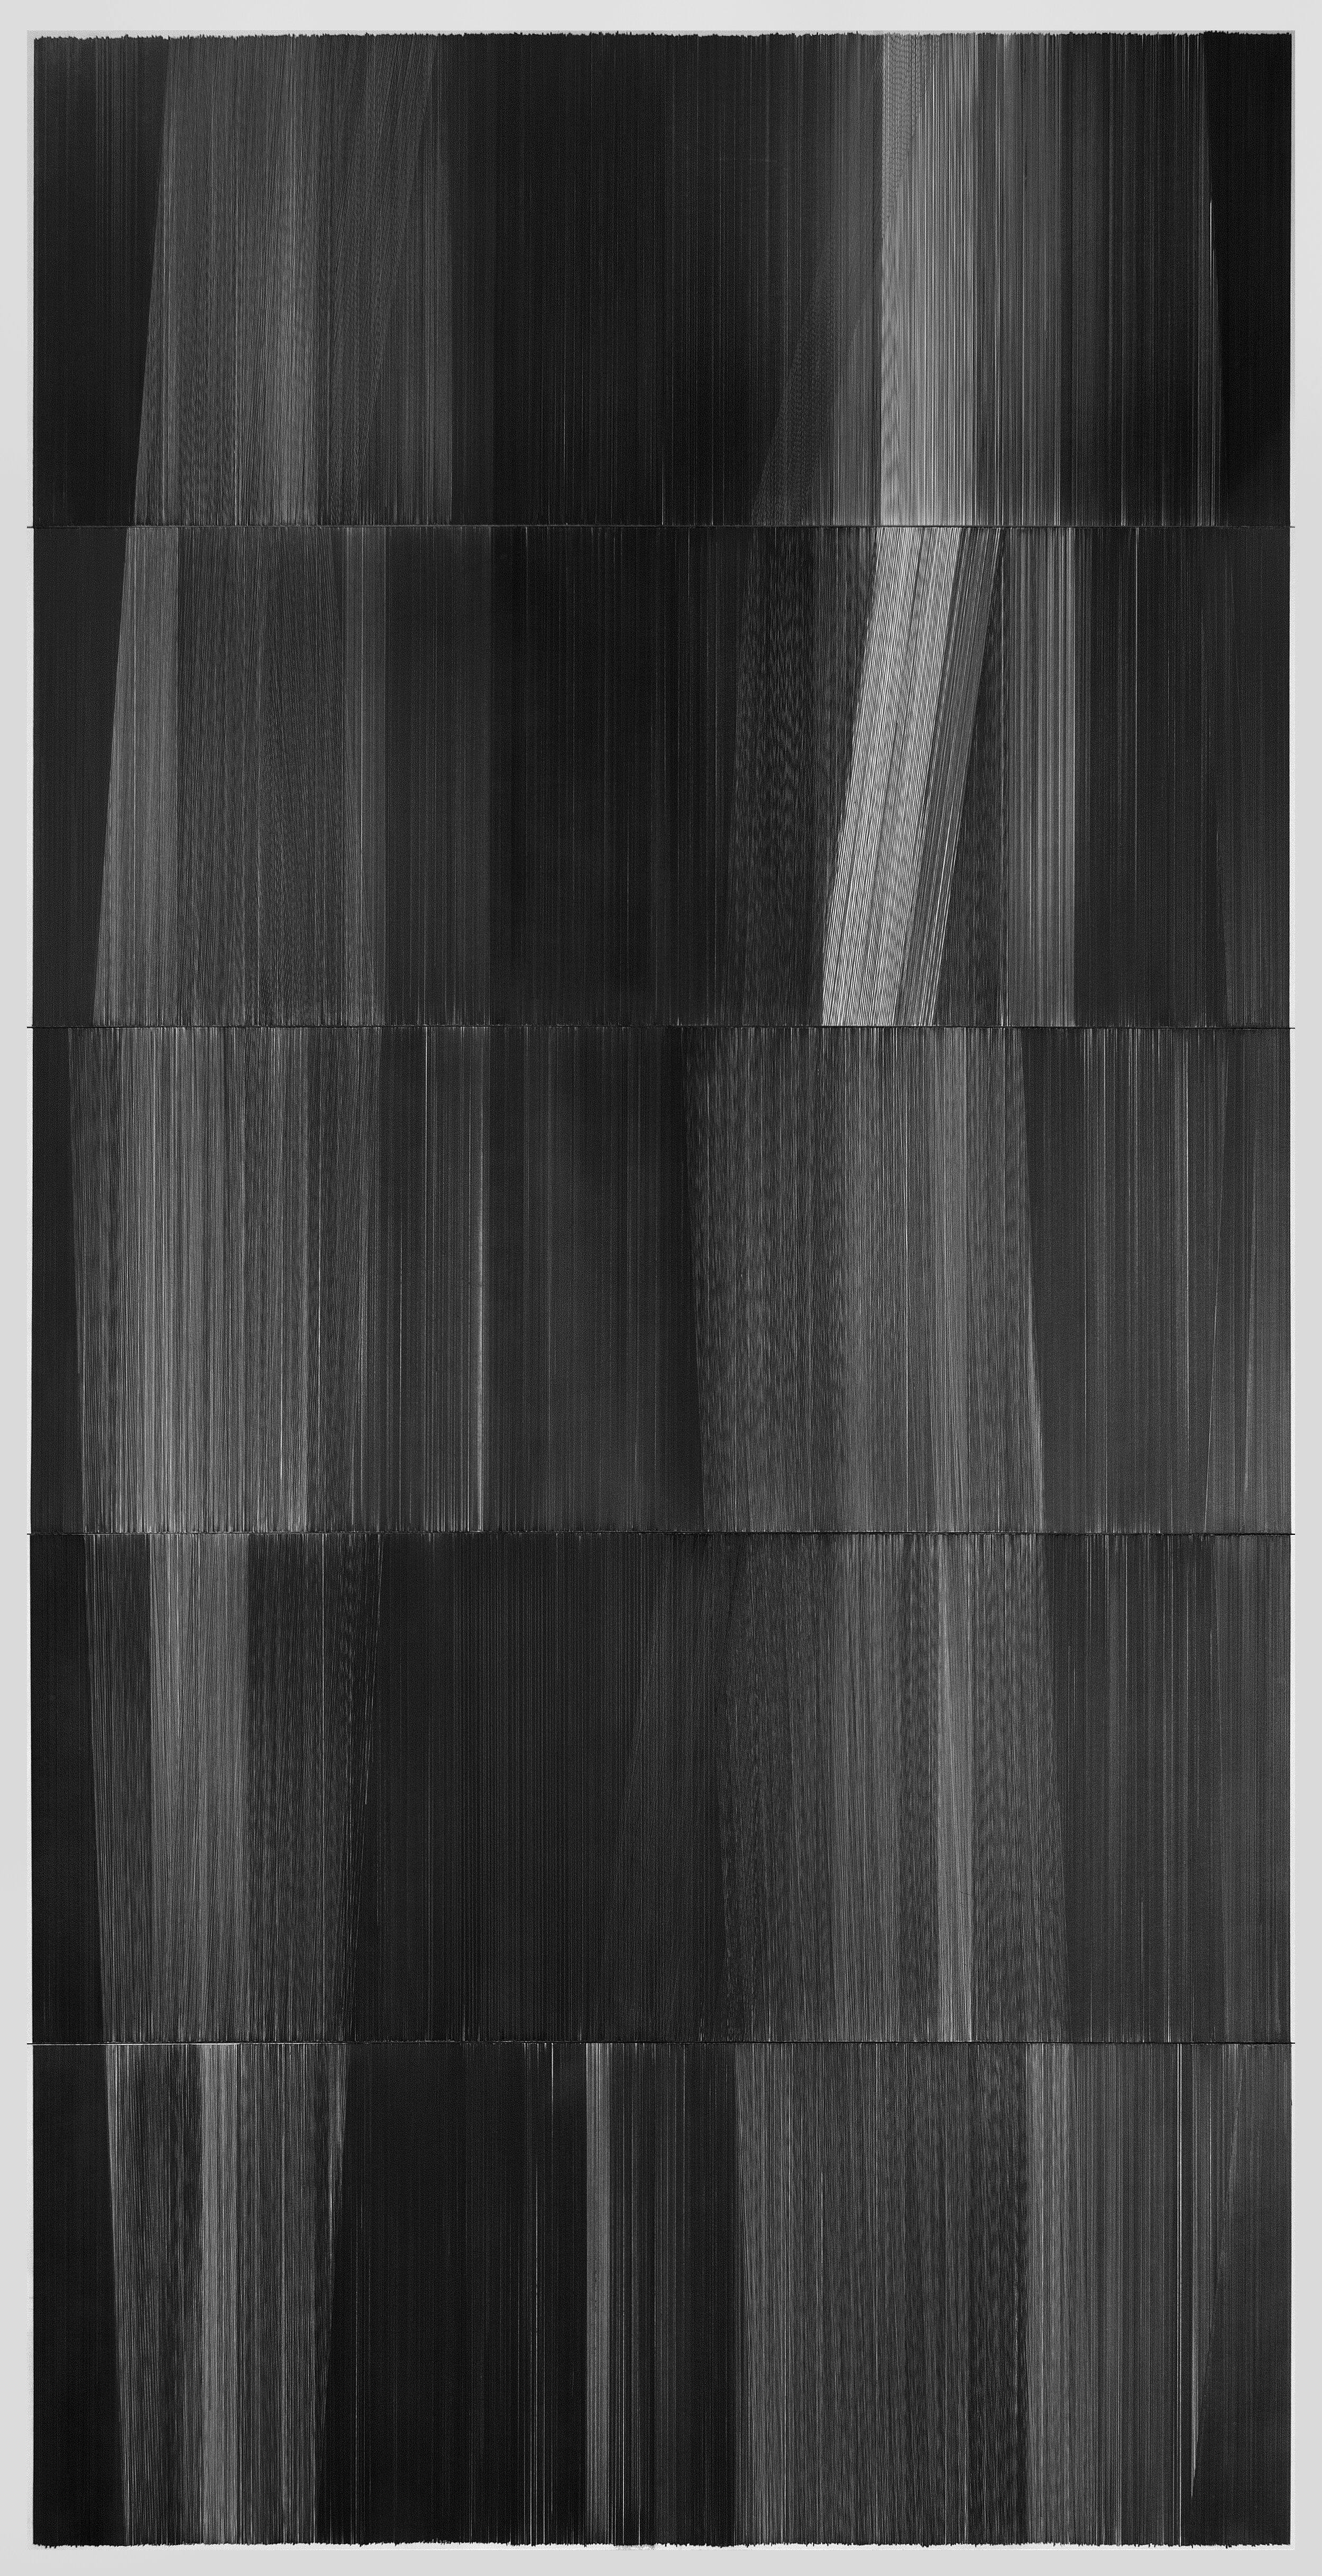    field drawing 03   2016 graphite on mat board, integrated wood frame 120 x 60 x 3 inches 